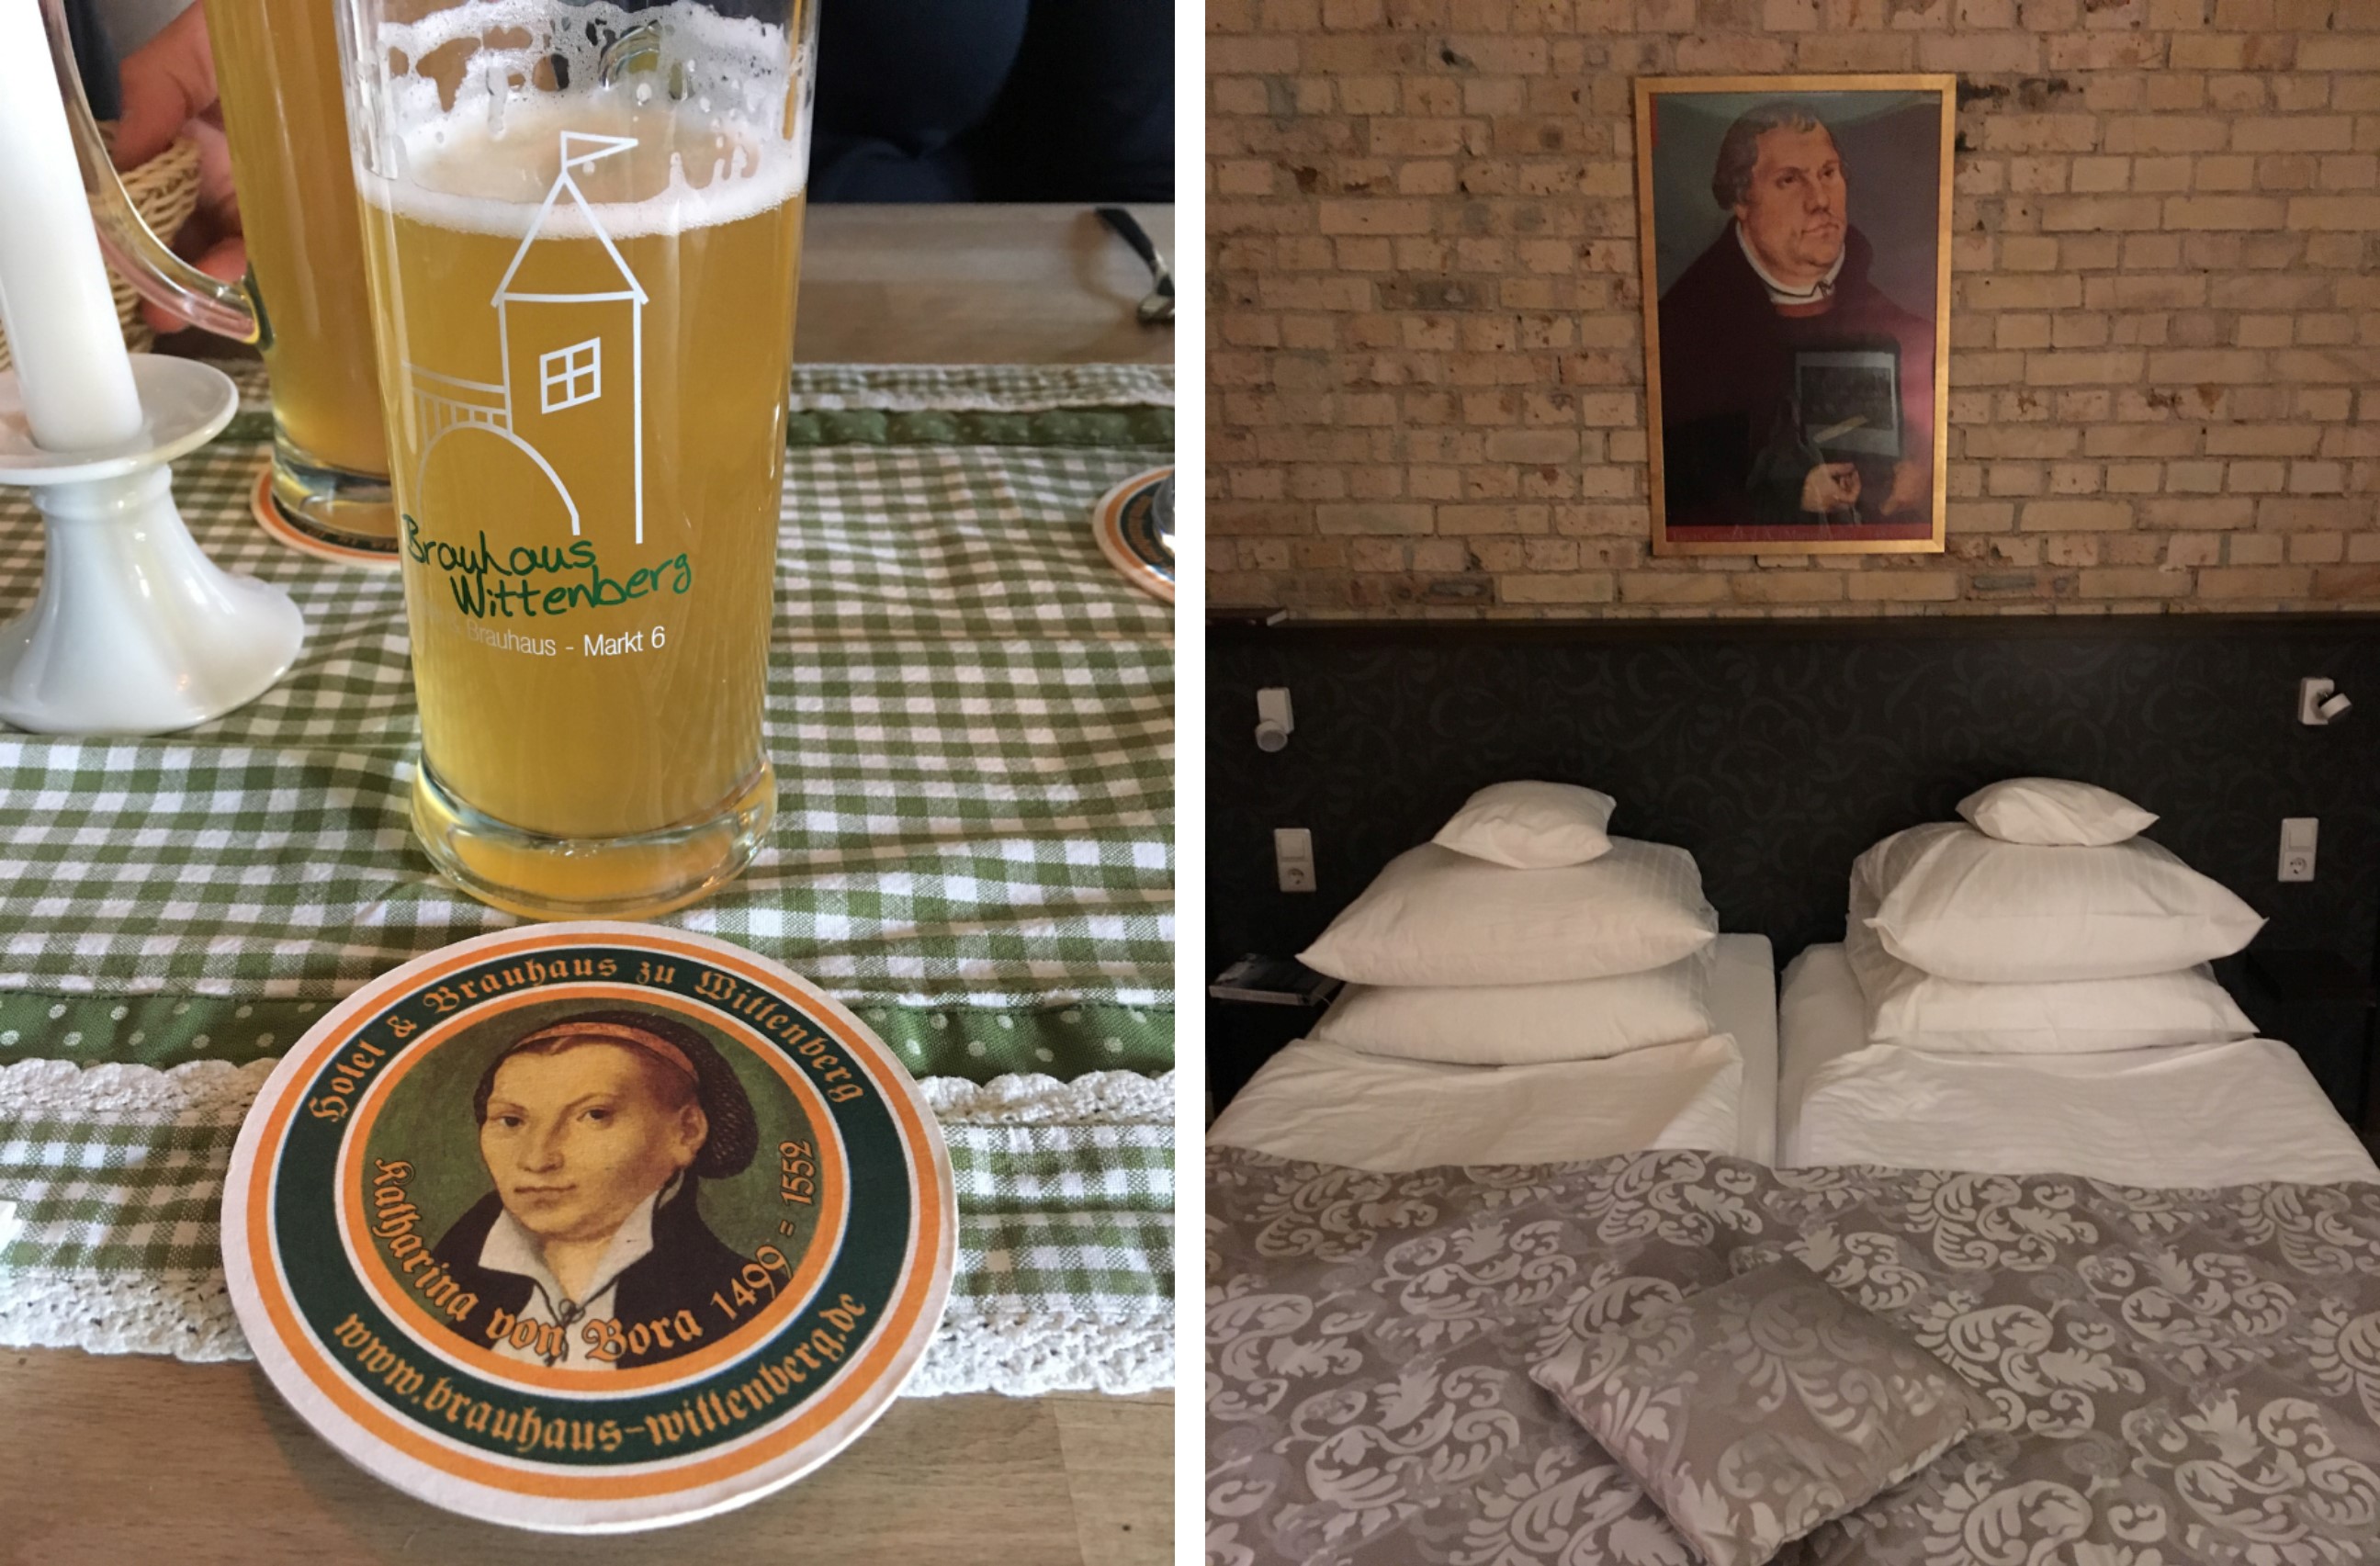 On the left, coaster commemorating Luther's wife. On the right, Luther-themed room decor.